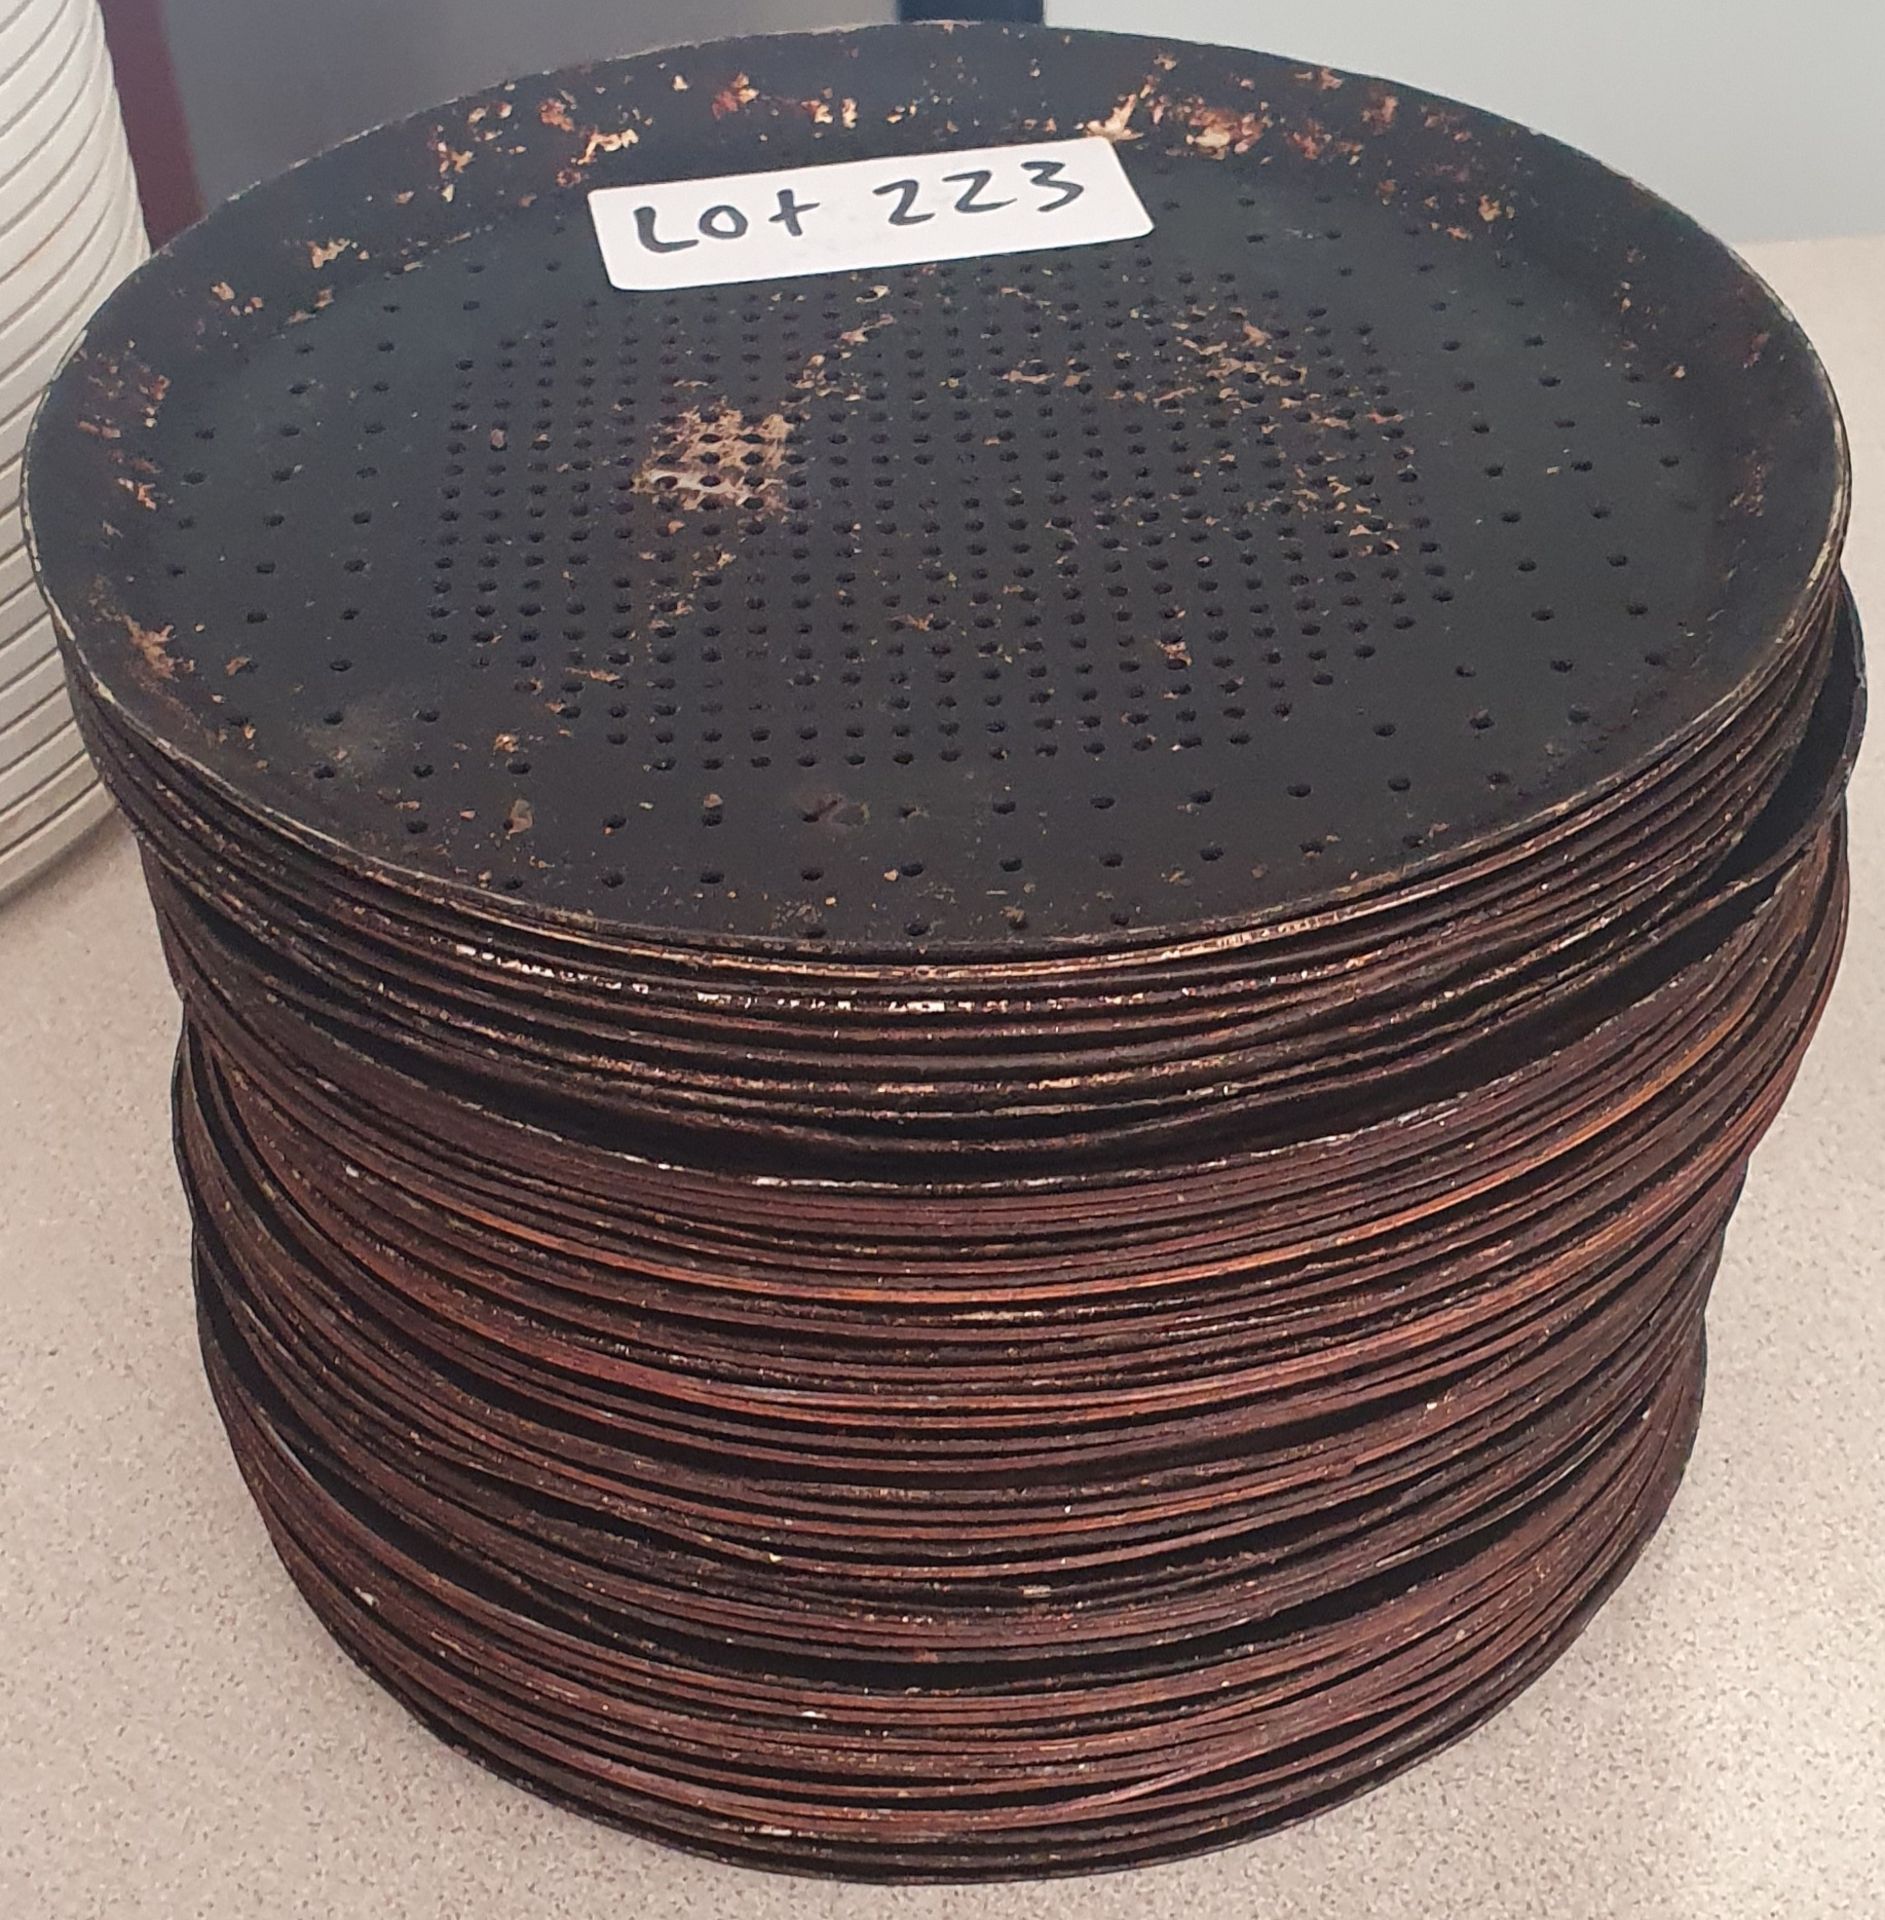 Pizza Hut 50 Thin Base Perforated Pans 10'Inch Approximate  - Image 2 of 2